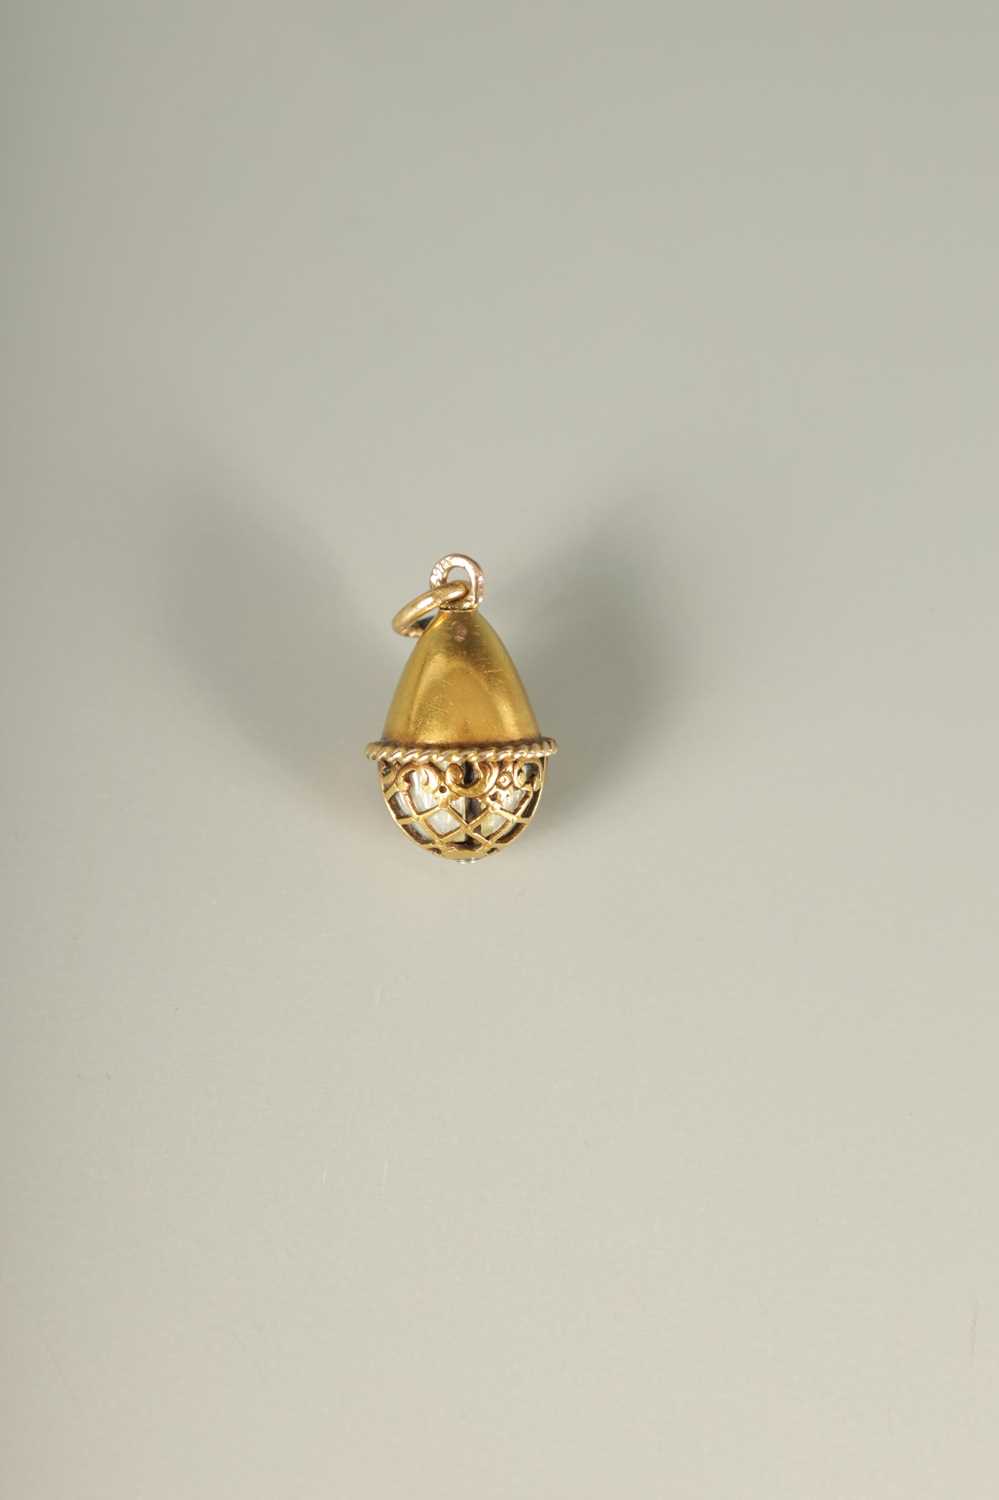 A LATE 19TH CENTURY FABERGE 14CT GOLD ENAMEL AND RUBY PENDANT EGG, WORKMASTER HENRIK WIGSTROM - Image 6 of 16